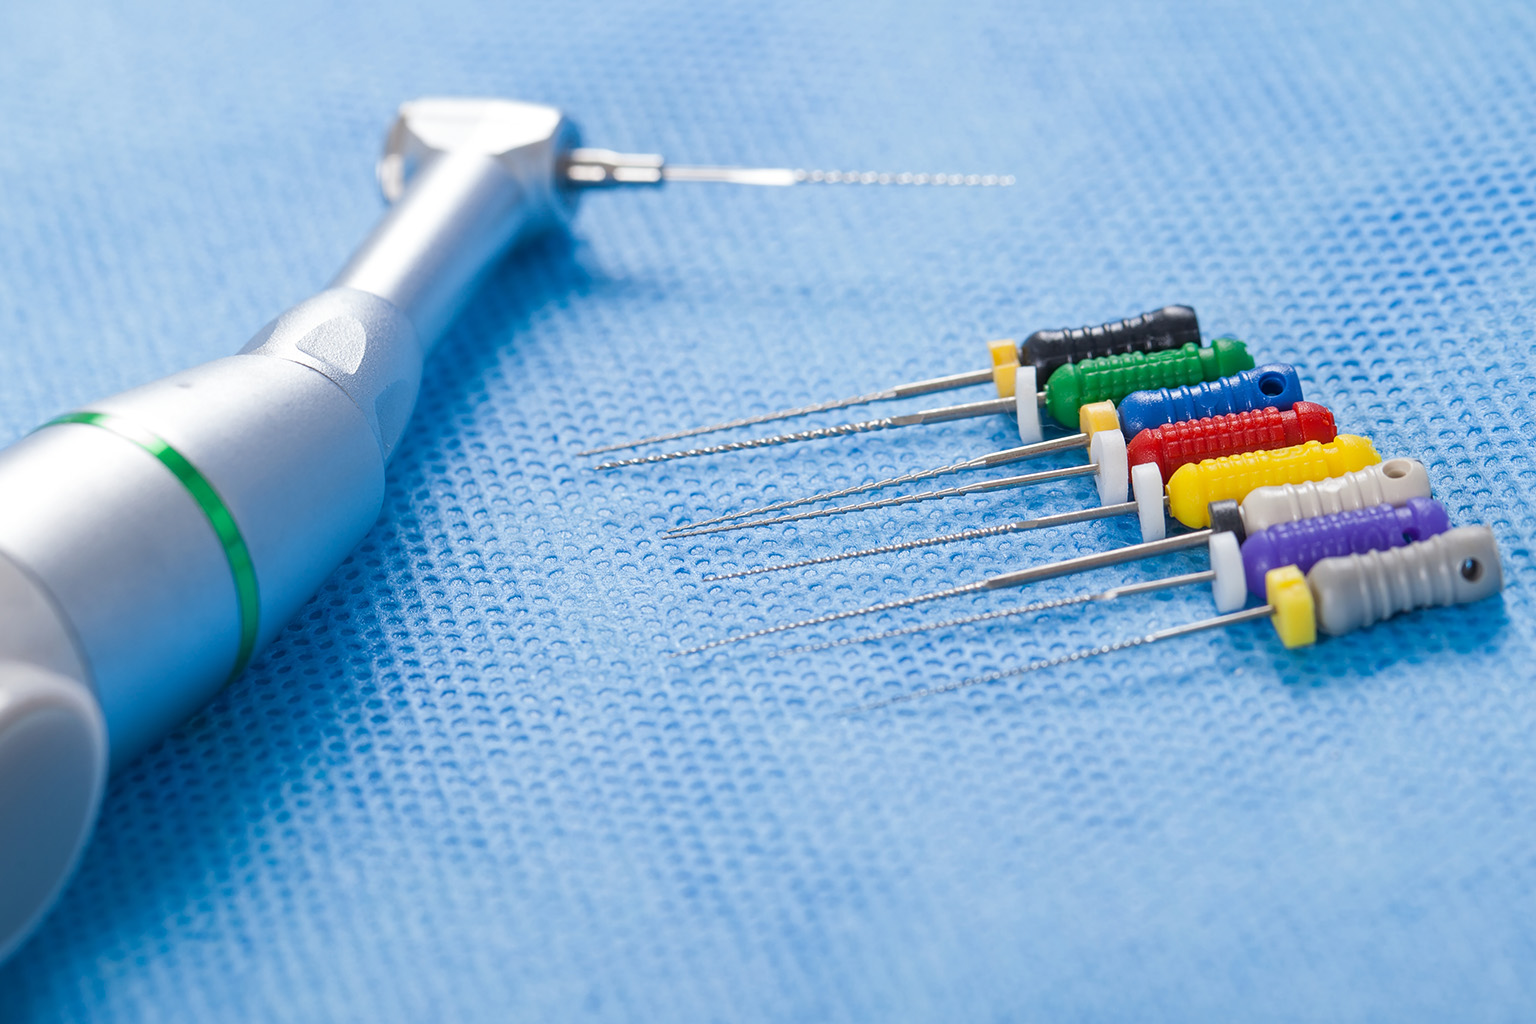 dental tools for performing a root canal on blue cloth